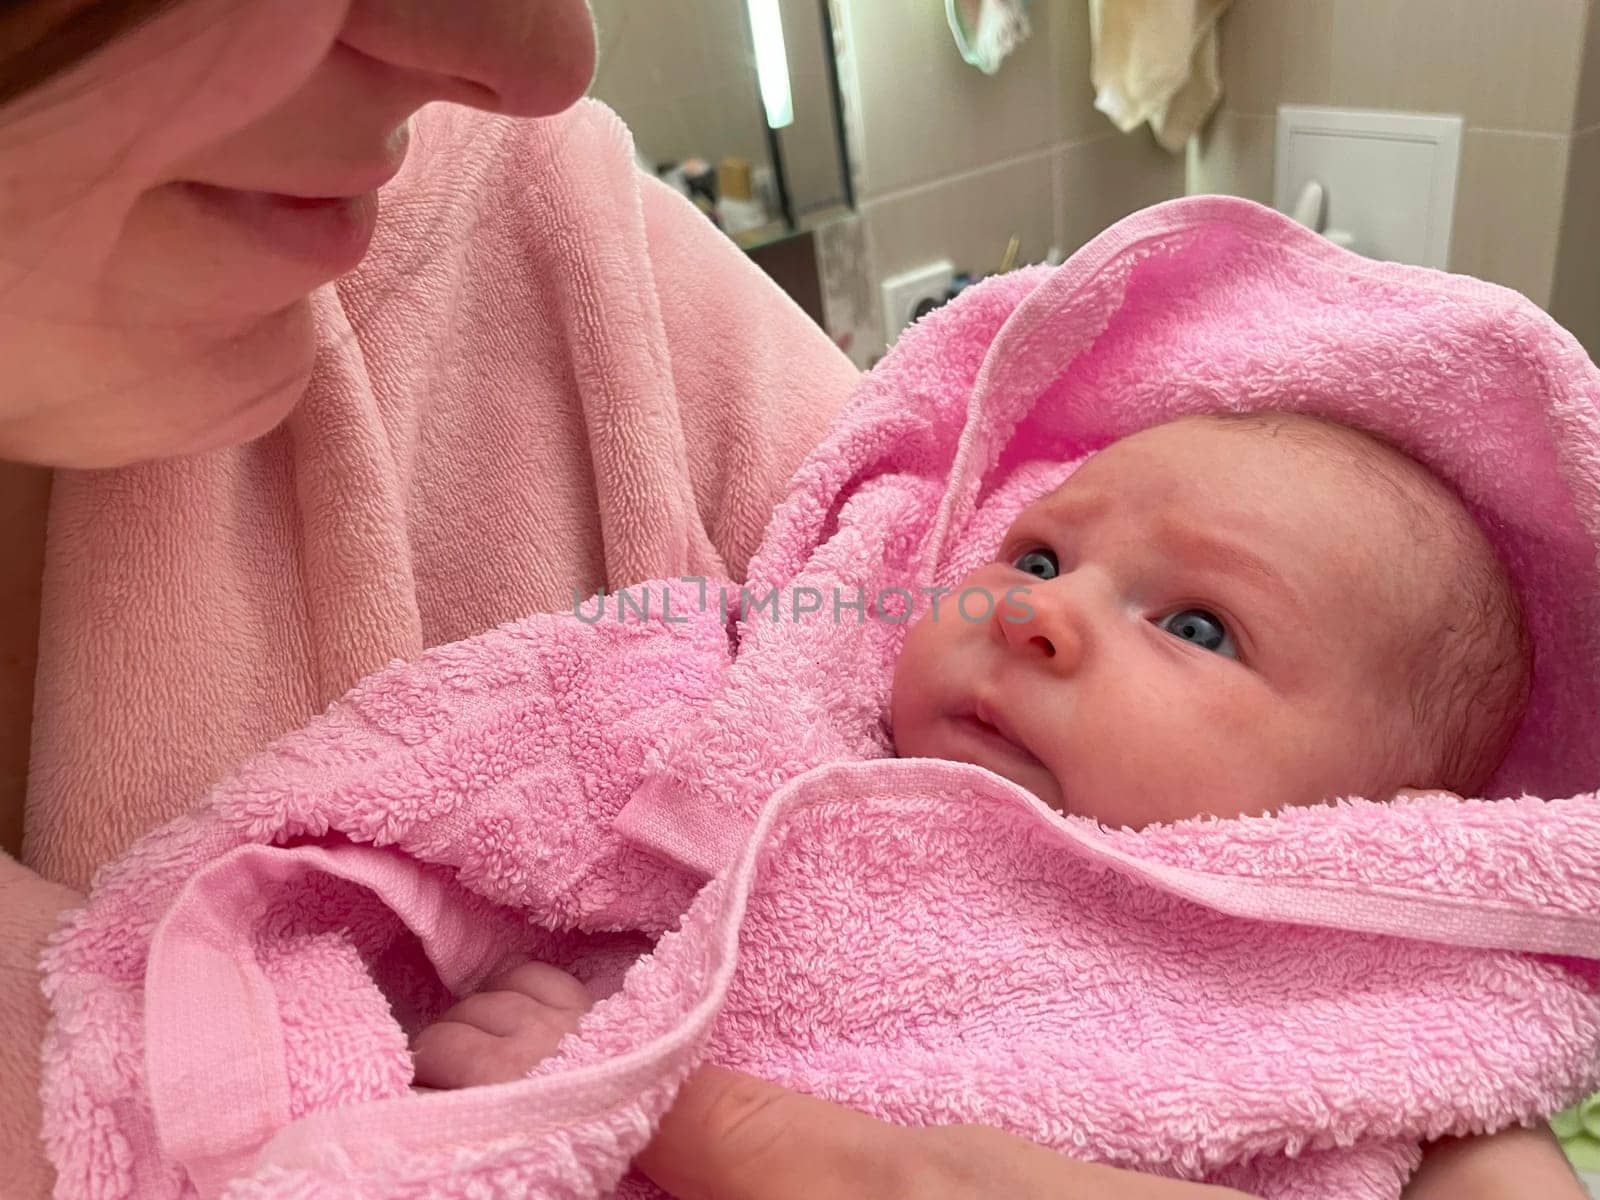 Woman Holding a newborn Baby after bathing in a Pink Towel. Selective focus by darksoul72